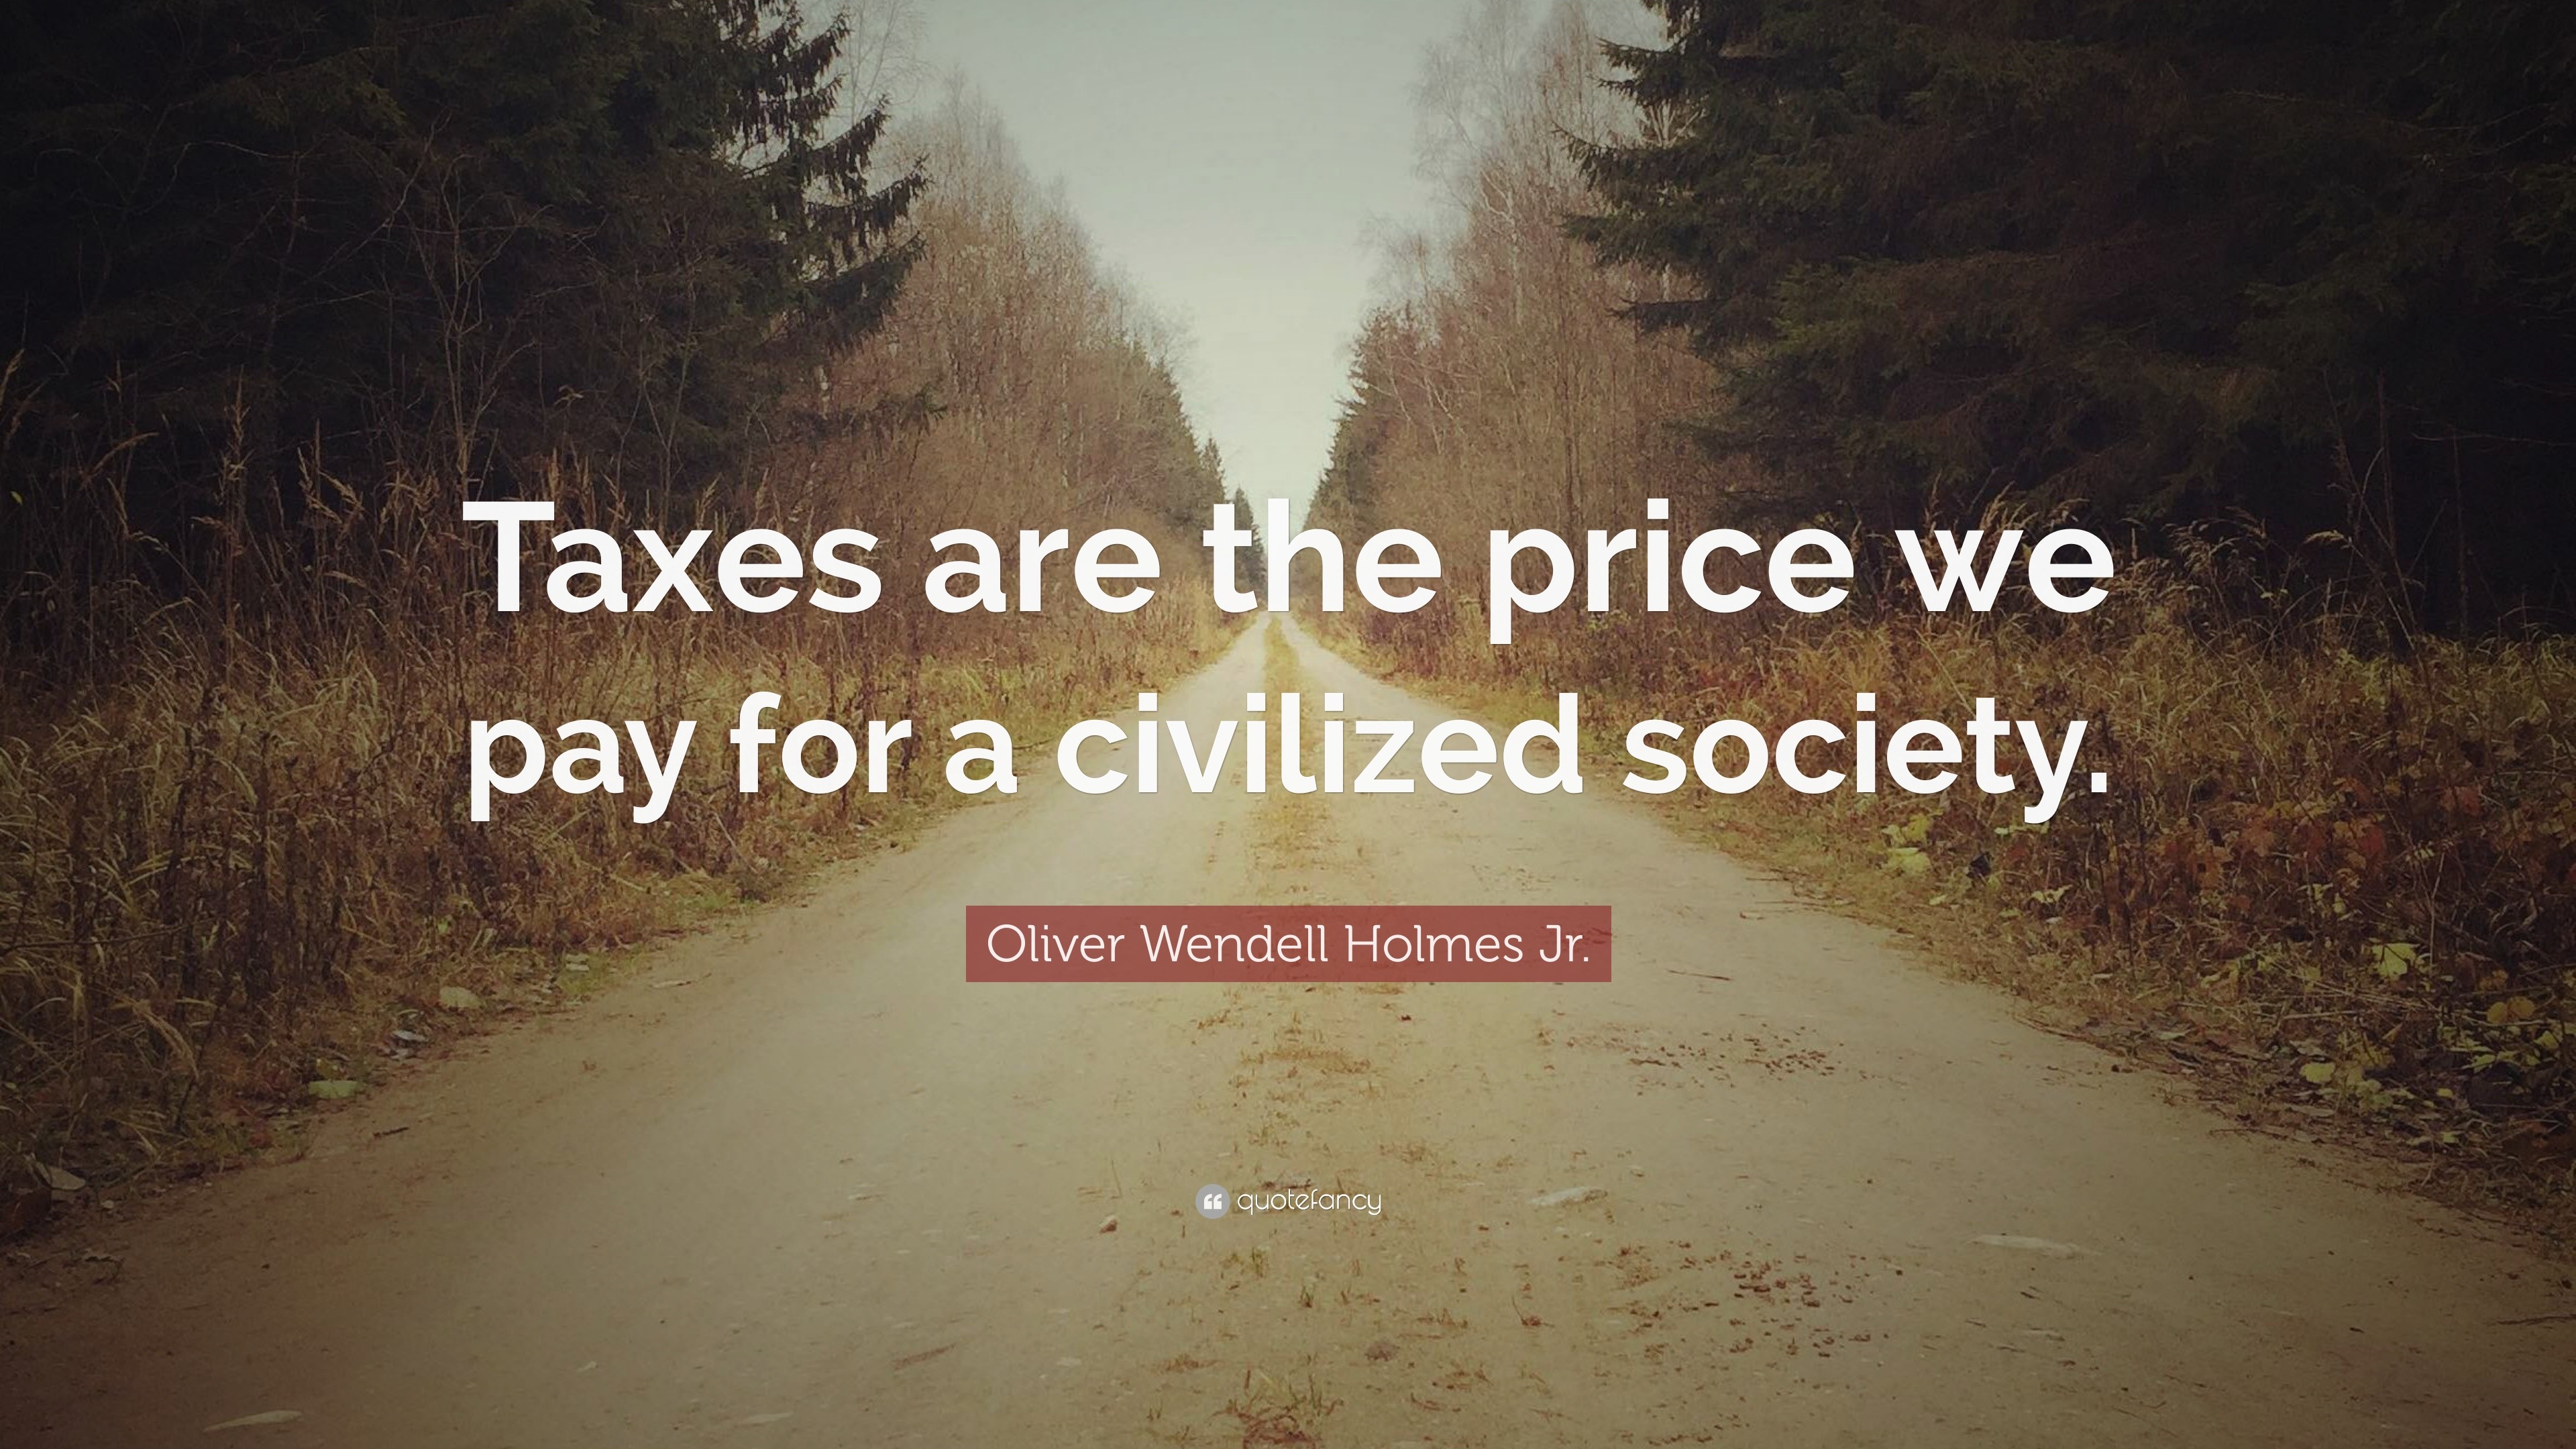 Oliver Wendell Holmes Jr. Quote: “Taxes